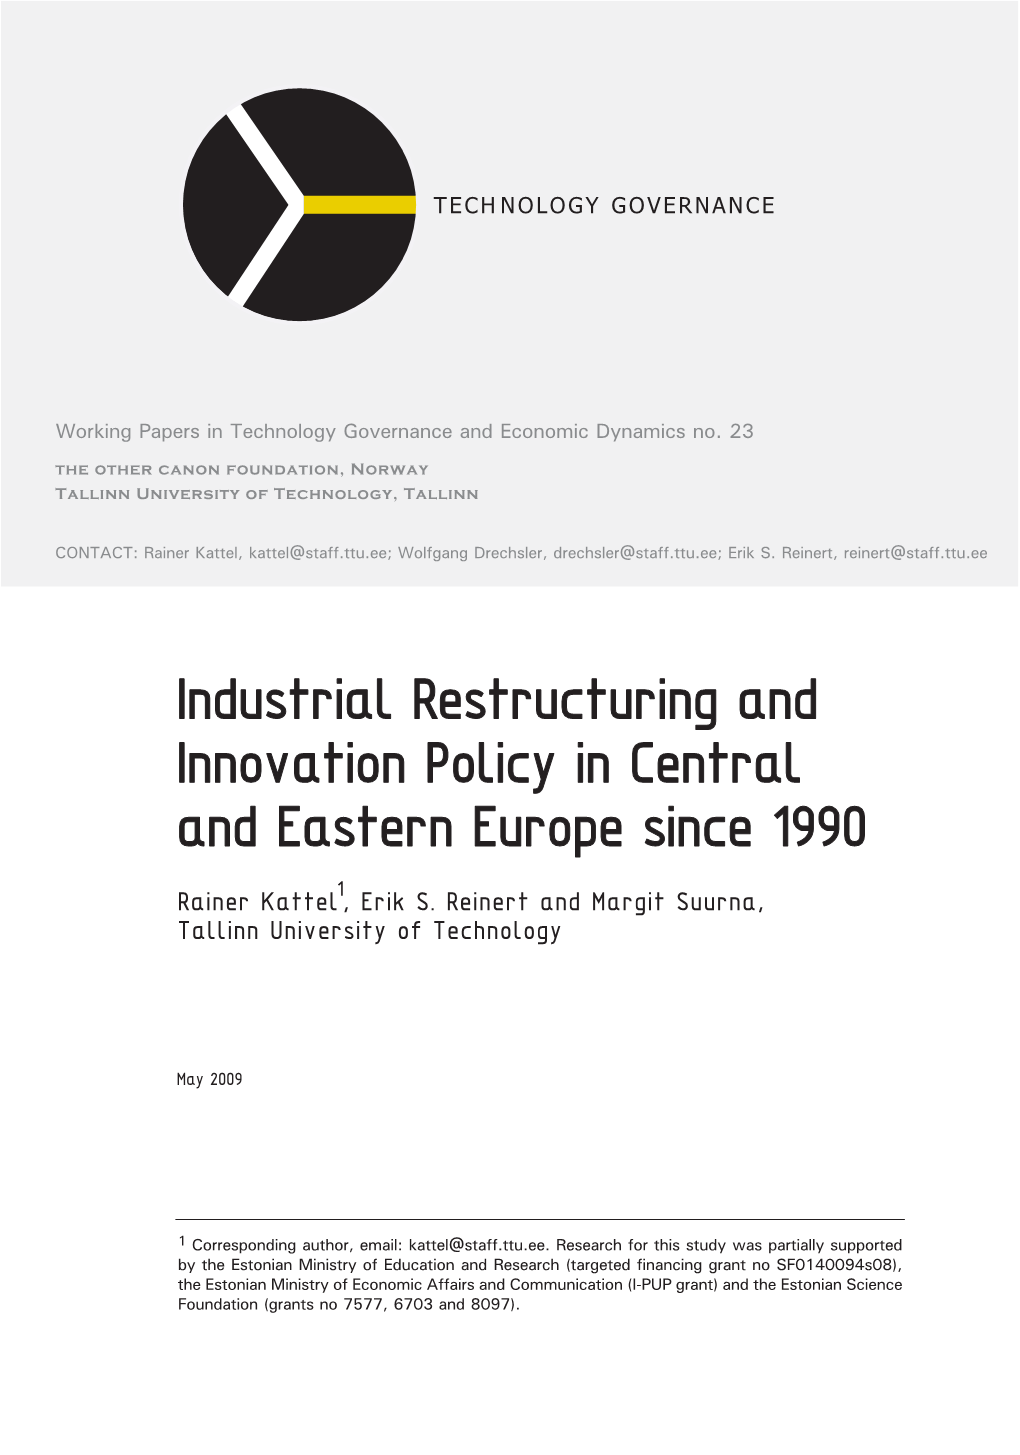 Industrial Restructuring and Innovation Policy in Central and Eastern Europe Since 1990.Pdf